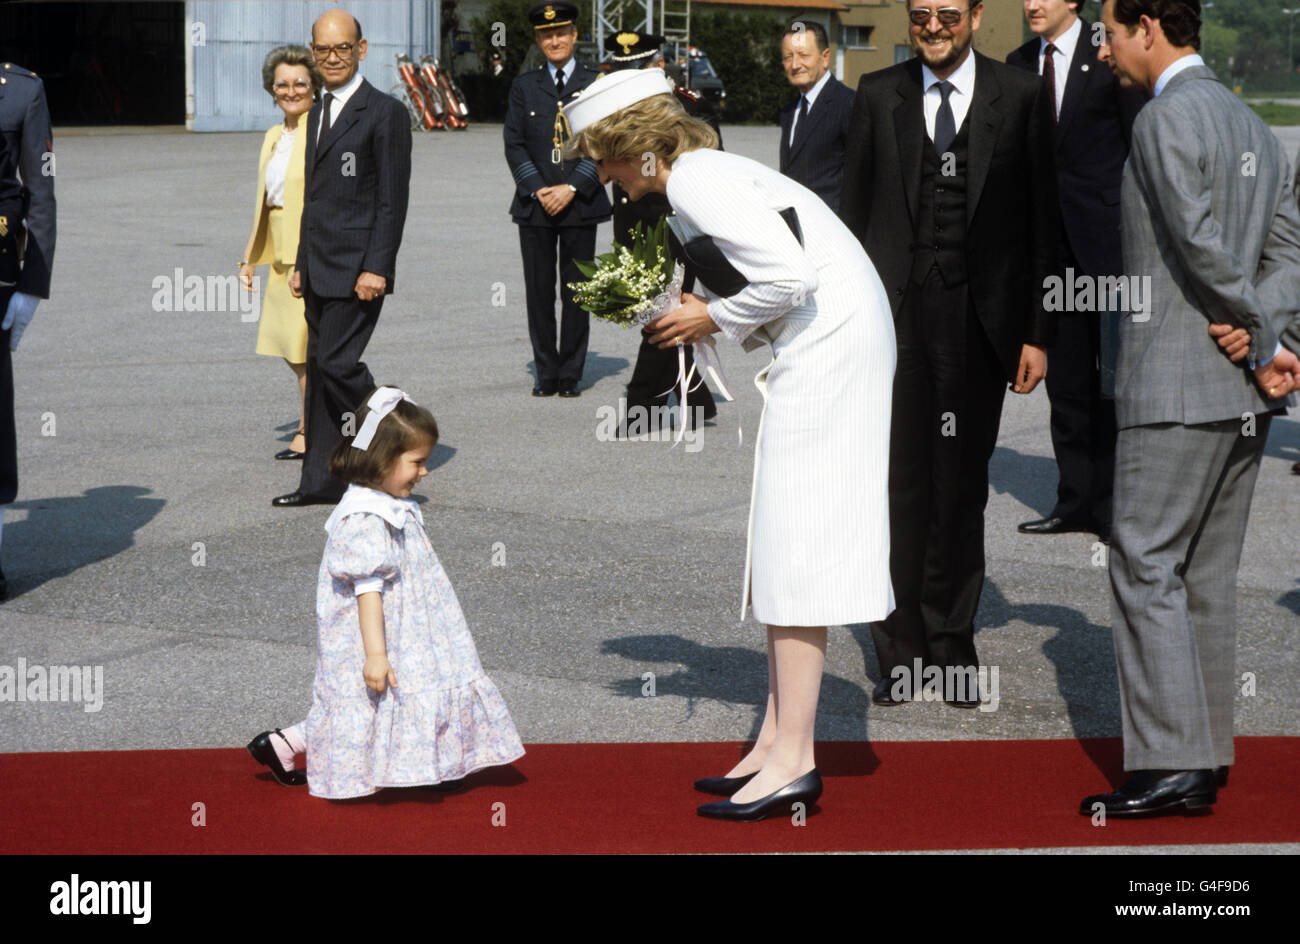 The Princess of Wales receives a nosegay from a small girl during her visit to La Spezia, Italy. Stock Photo